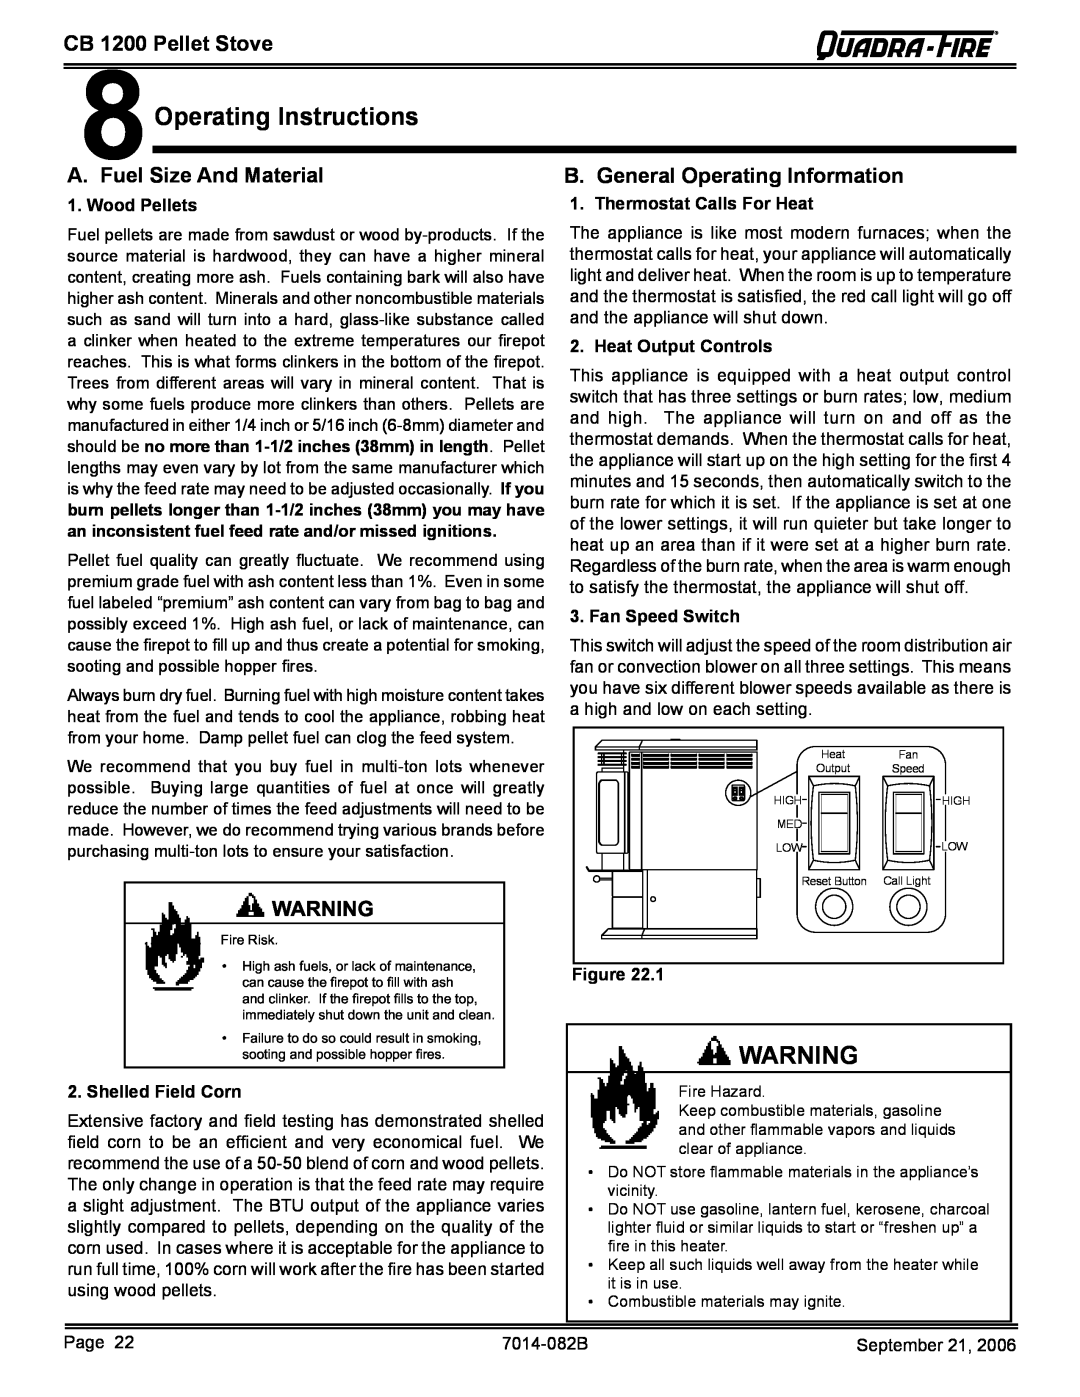 Quadra-Fire CB1200 Operating Instructions, Fuel Size And Material, B. General Operating Information, CB 1200 Pellet Stove 